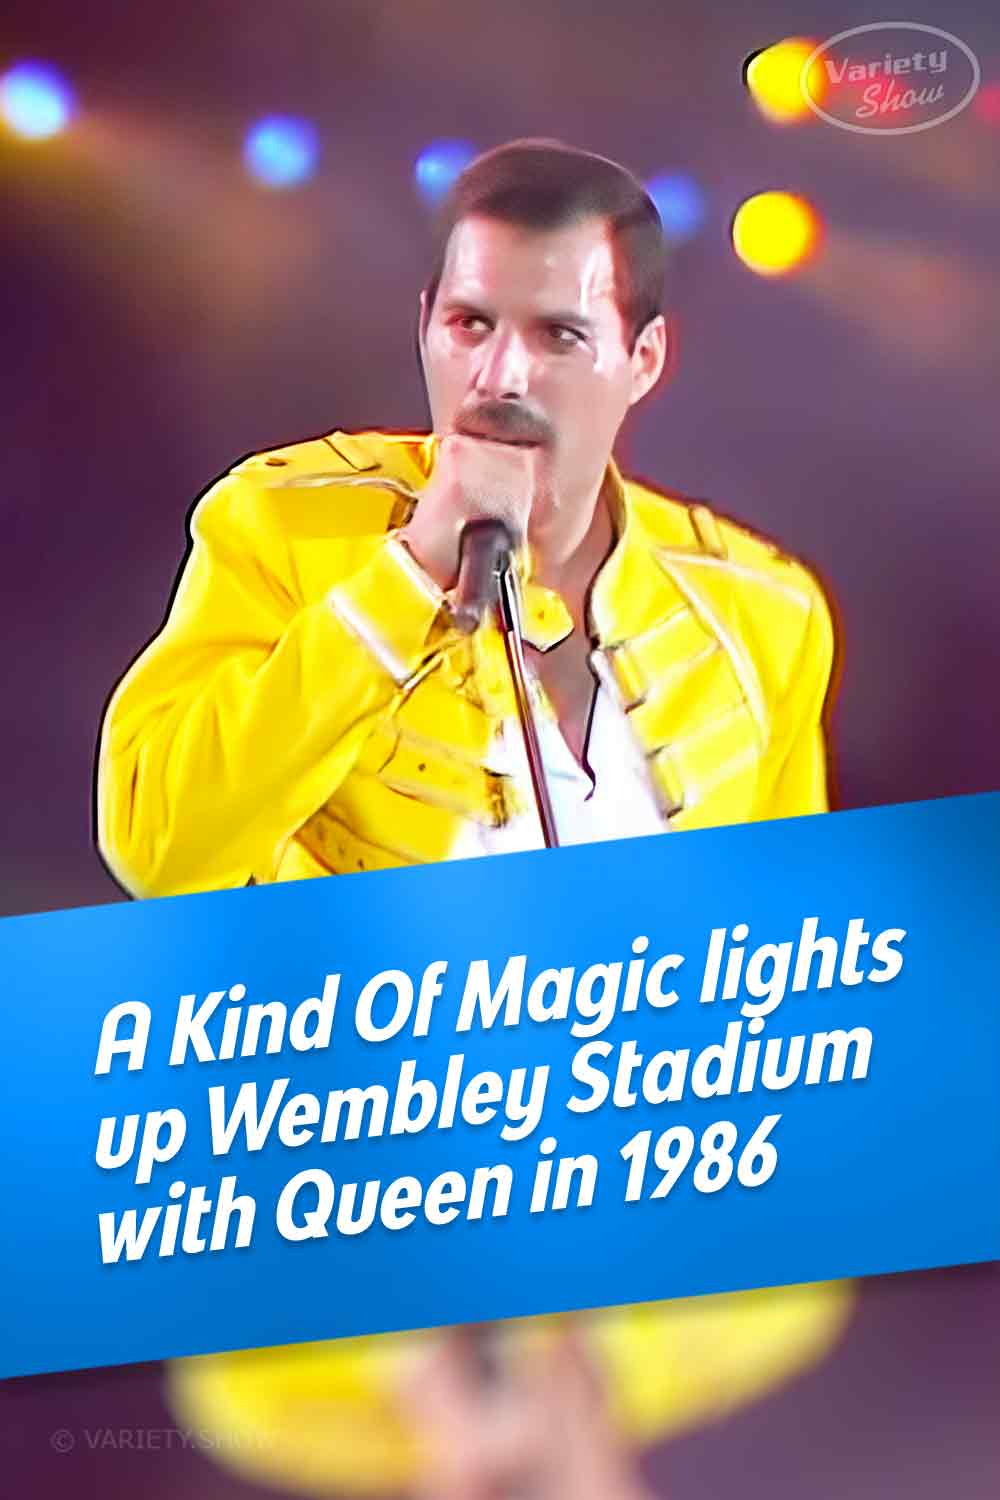 A Kind Of Magic lights up Wembley Stadium with Queen in 1986